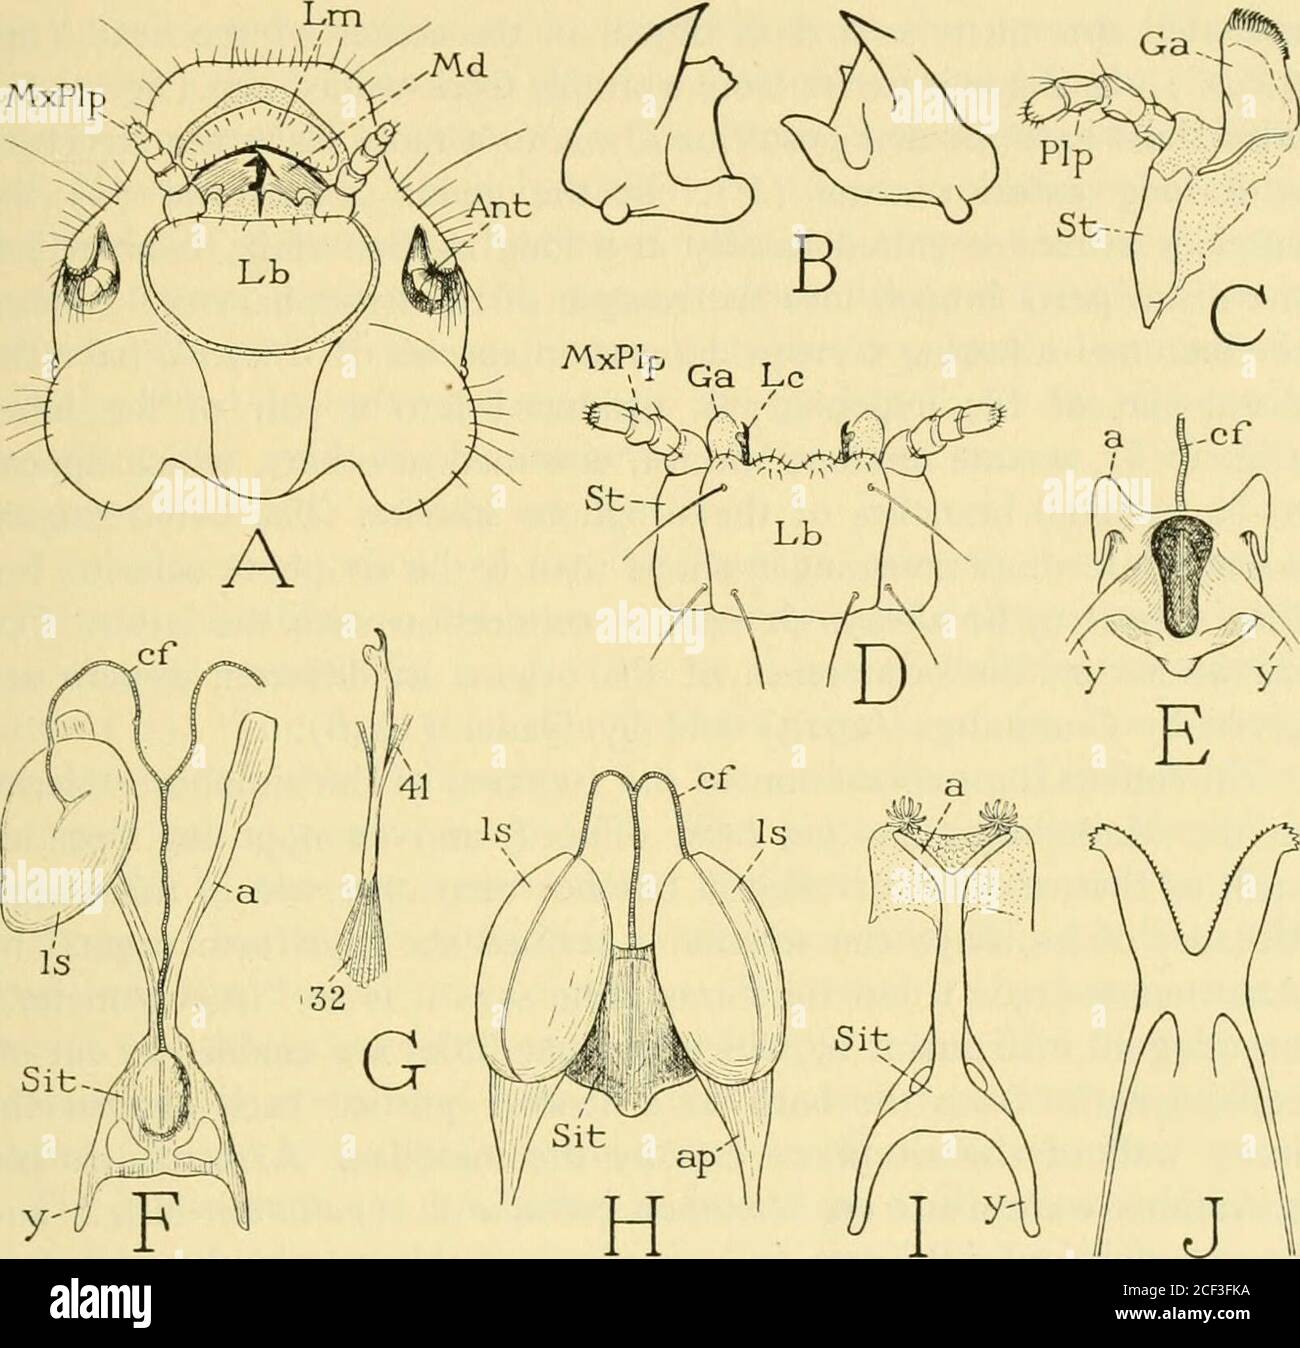 . Smithsonian miscellaneous collections. e, the lacinia has been lost in the majority ofspecies, and the persisting maxillary lobe is the galea. The use of thelacinial forks is not known, but their position and musculaturesuggest that they serve as picks. The labium of the Mallophaga is always a simple structure, con-sisting of a broad plate in the under wall of the head (fig. 11 A, D,Lb) bearing two or four small terminal lobes. The simplicity of thelabium is in line with the simplification of the organ in the Corrodentia.The mallophagan labium can play only a passive role in feeding. The hyp Stock Photo